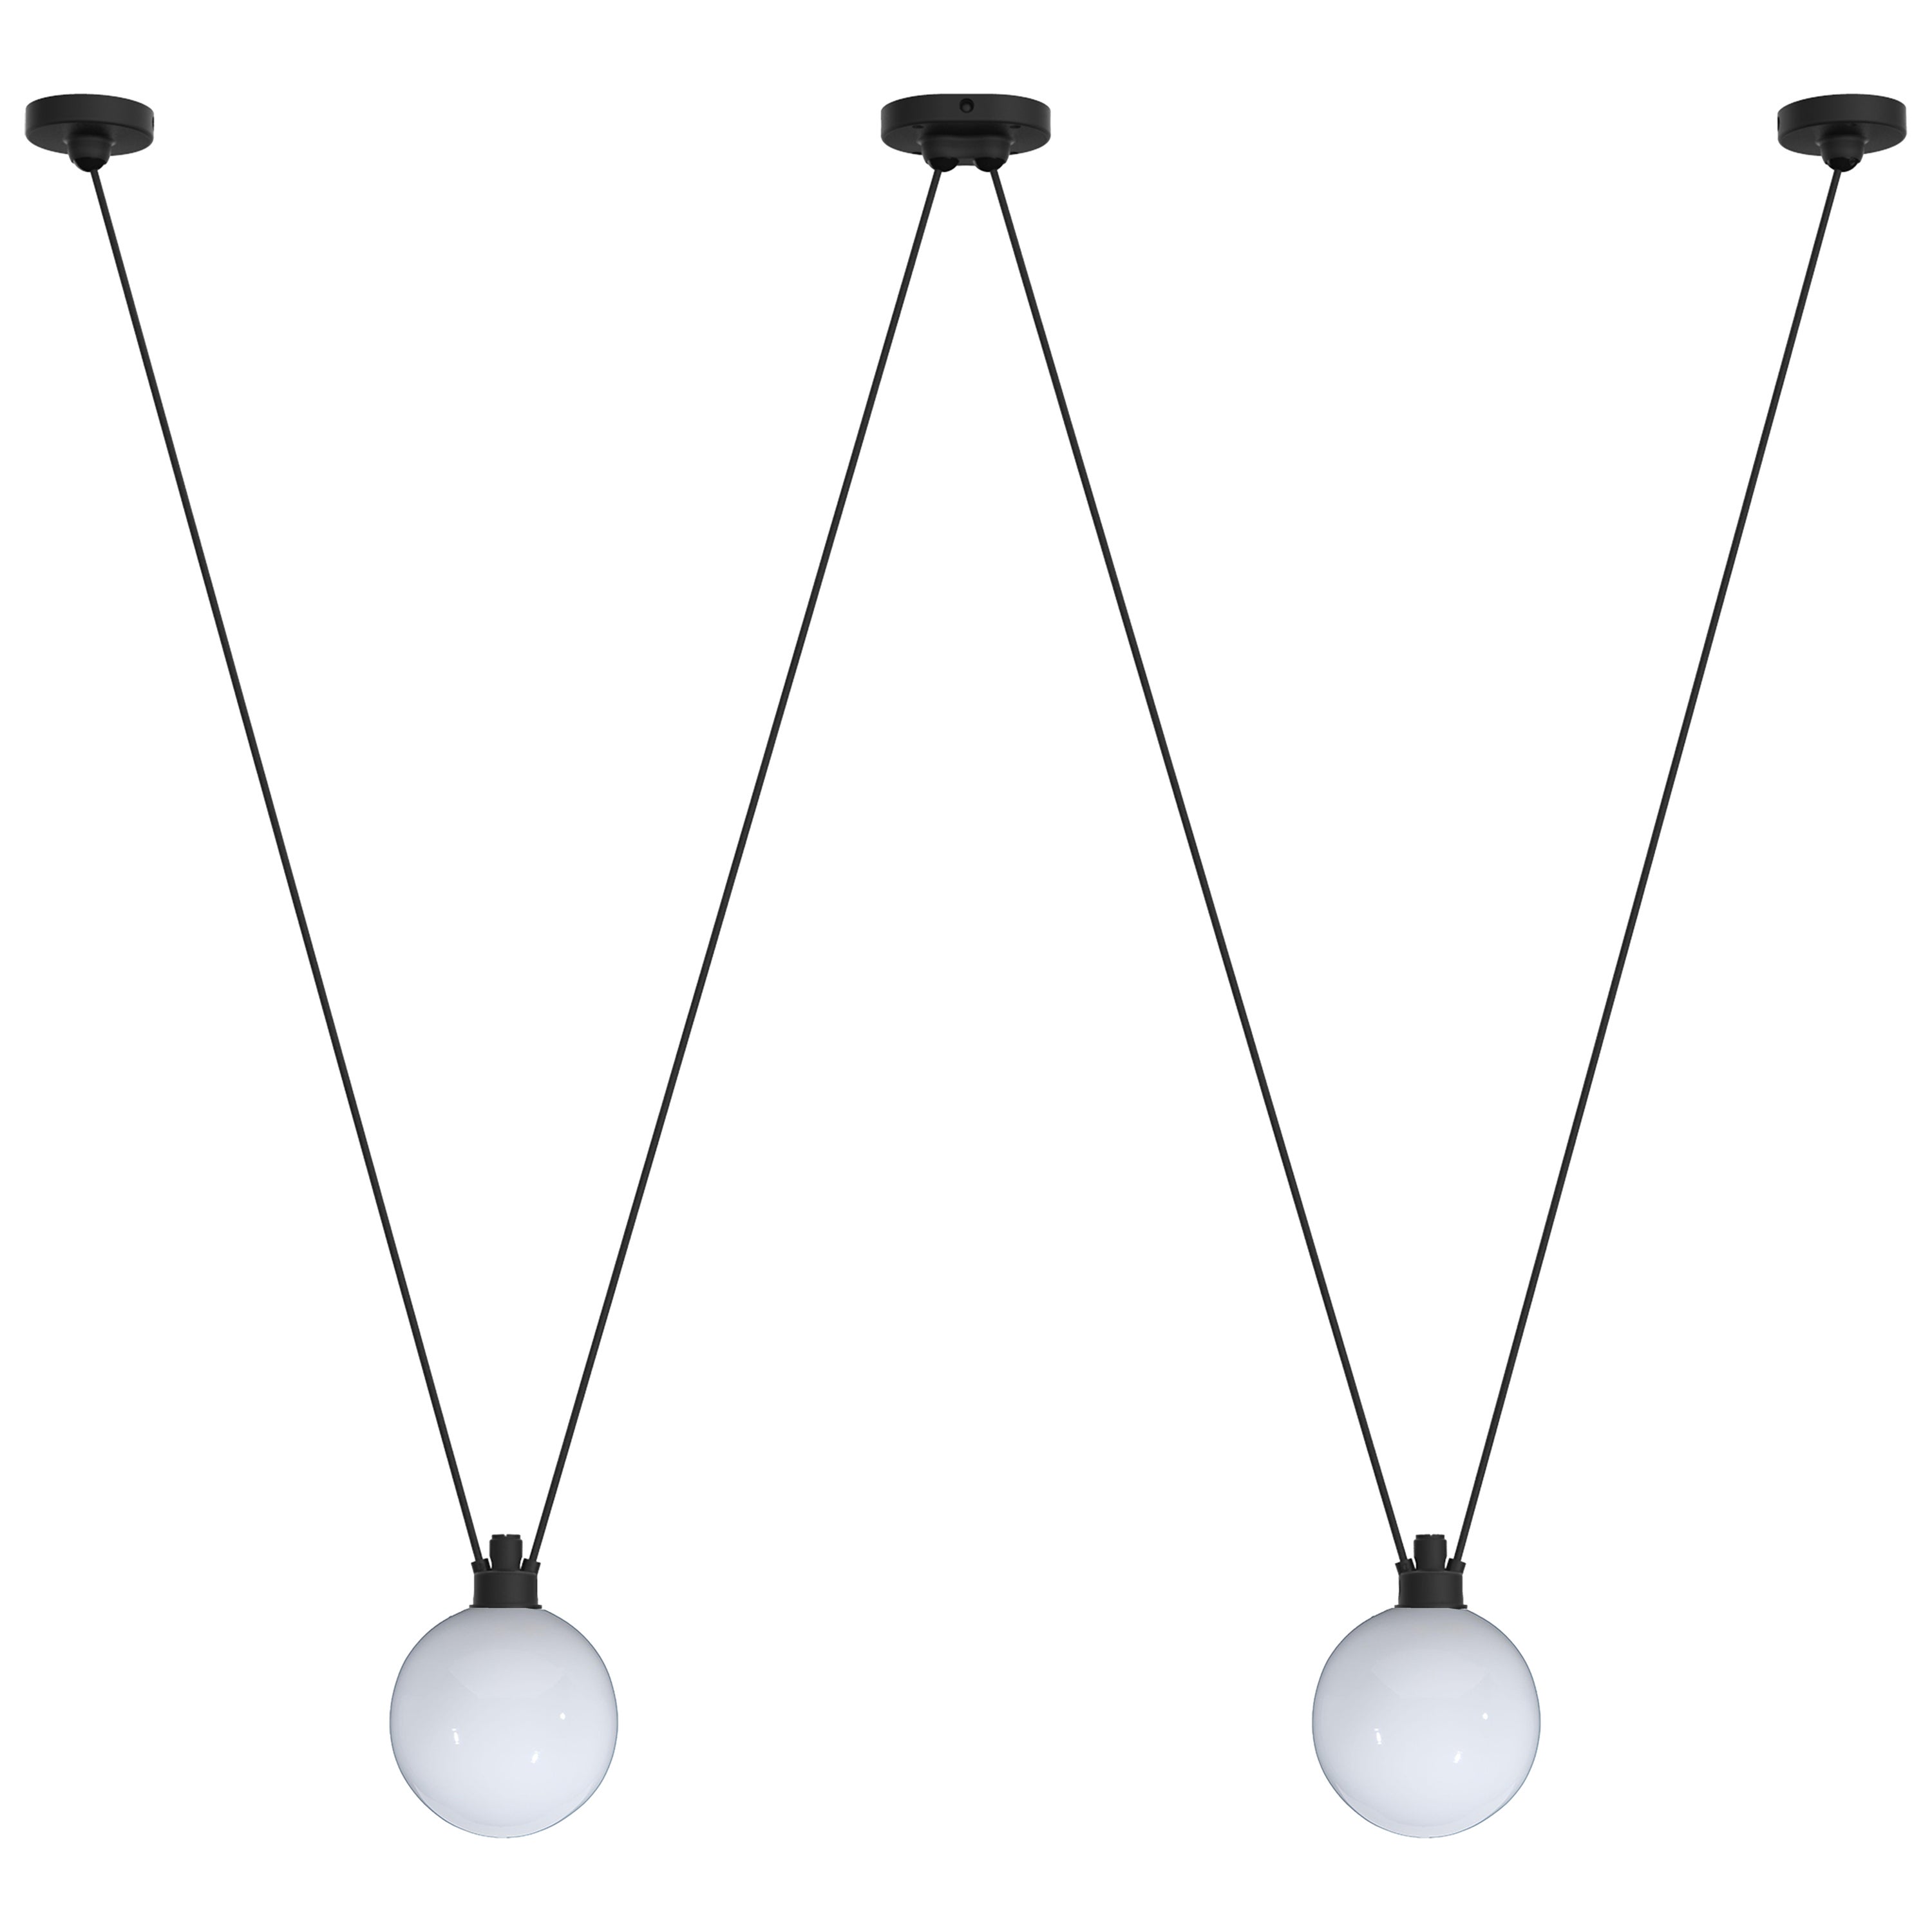 DCW Editions Les Acrobates N°324 Pendant Lamp in Black Arm and Small Glassball